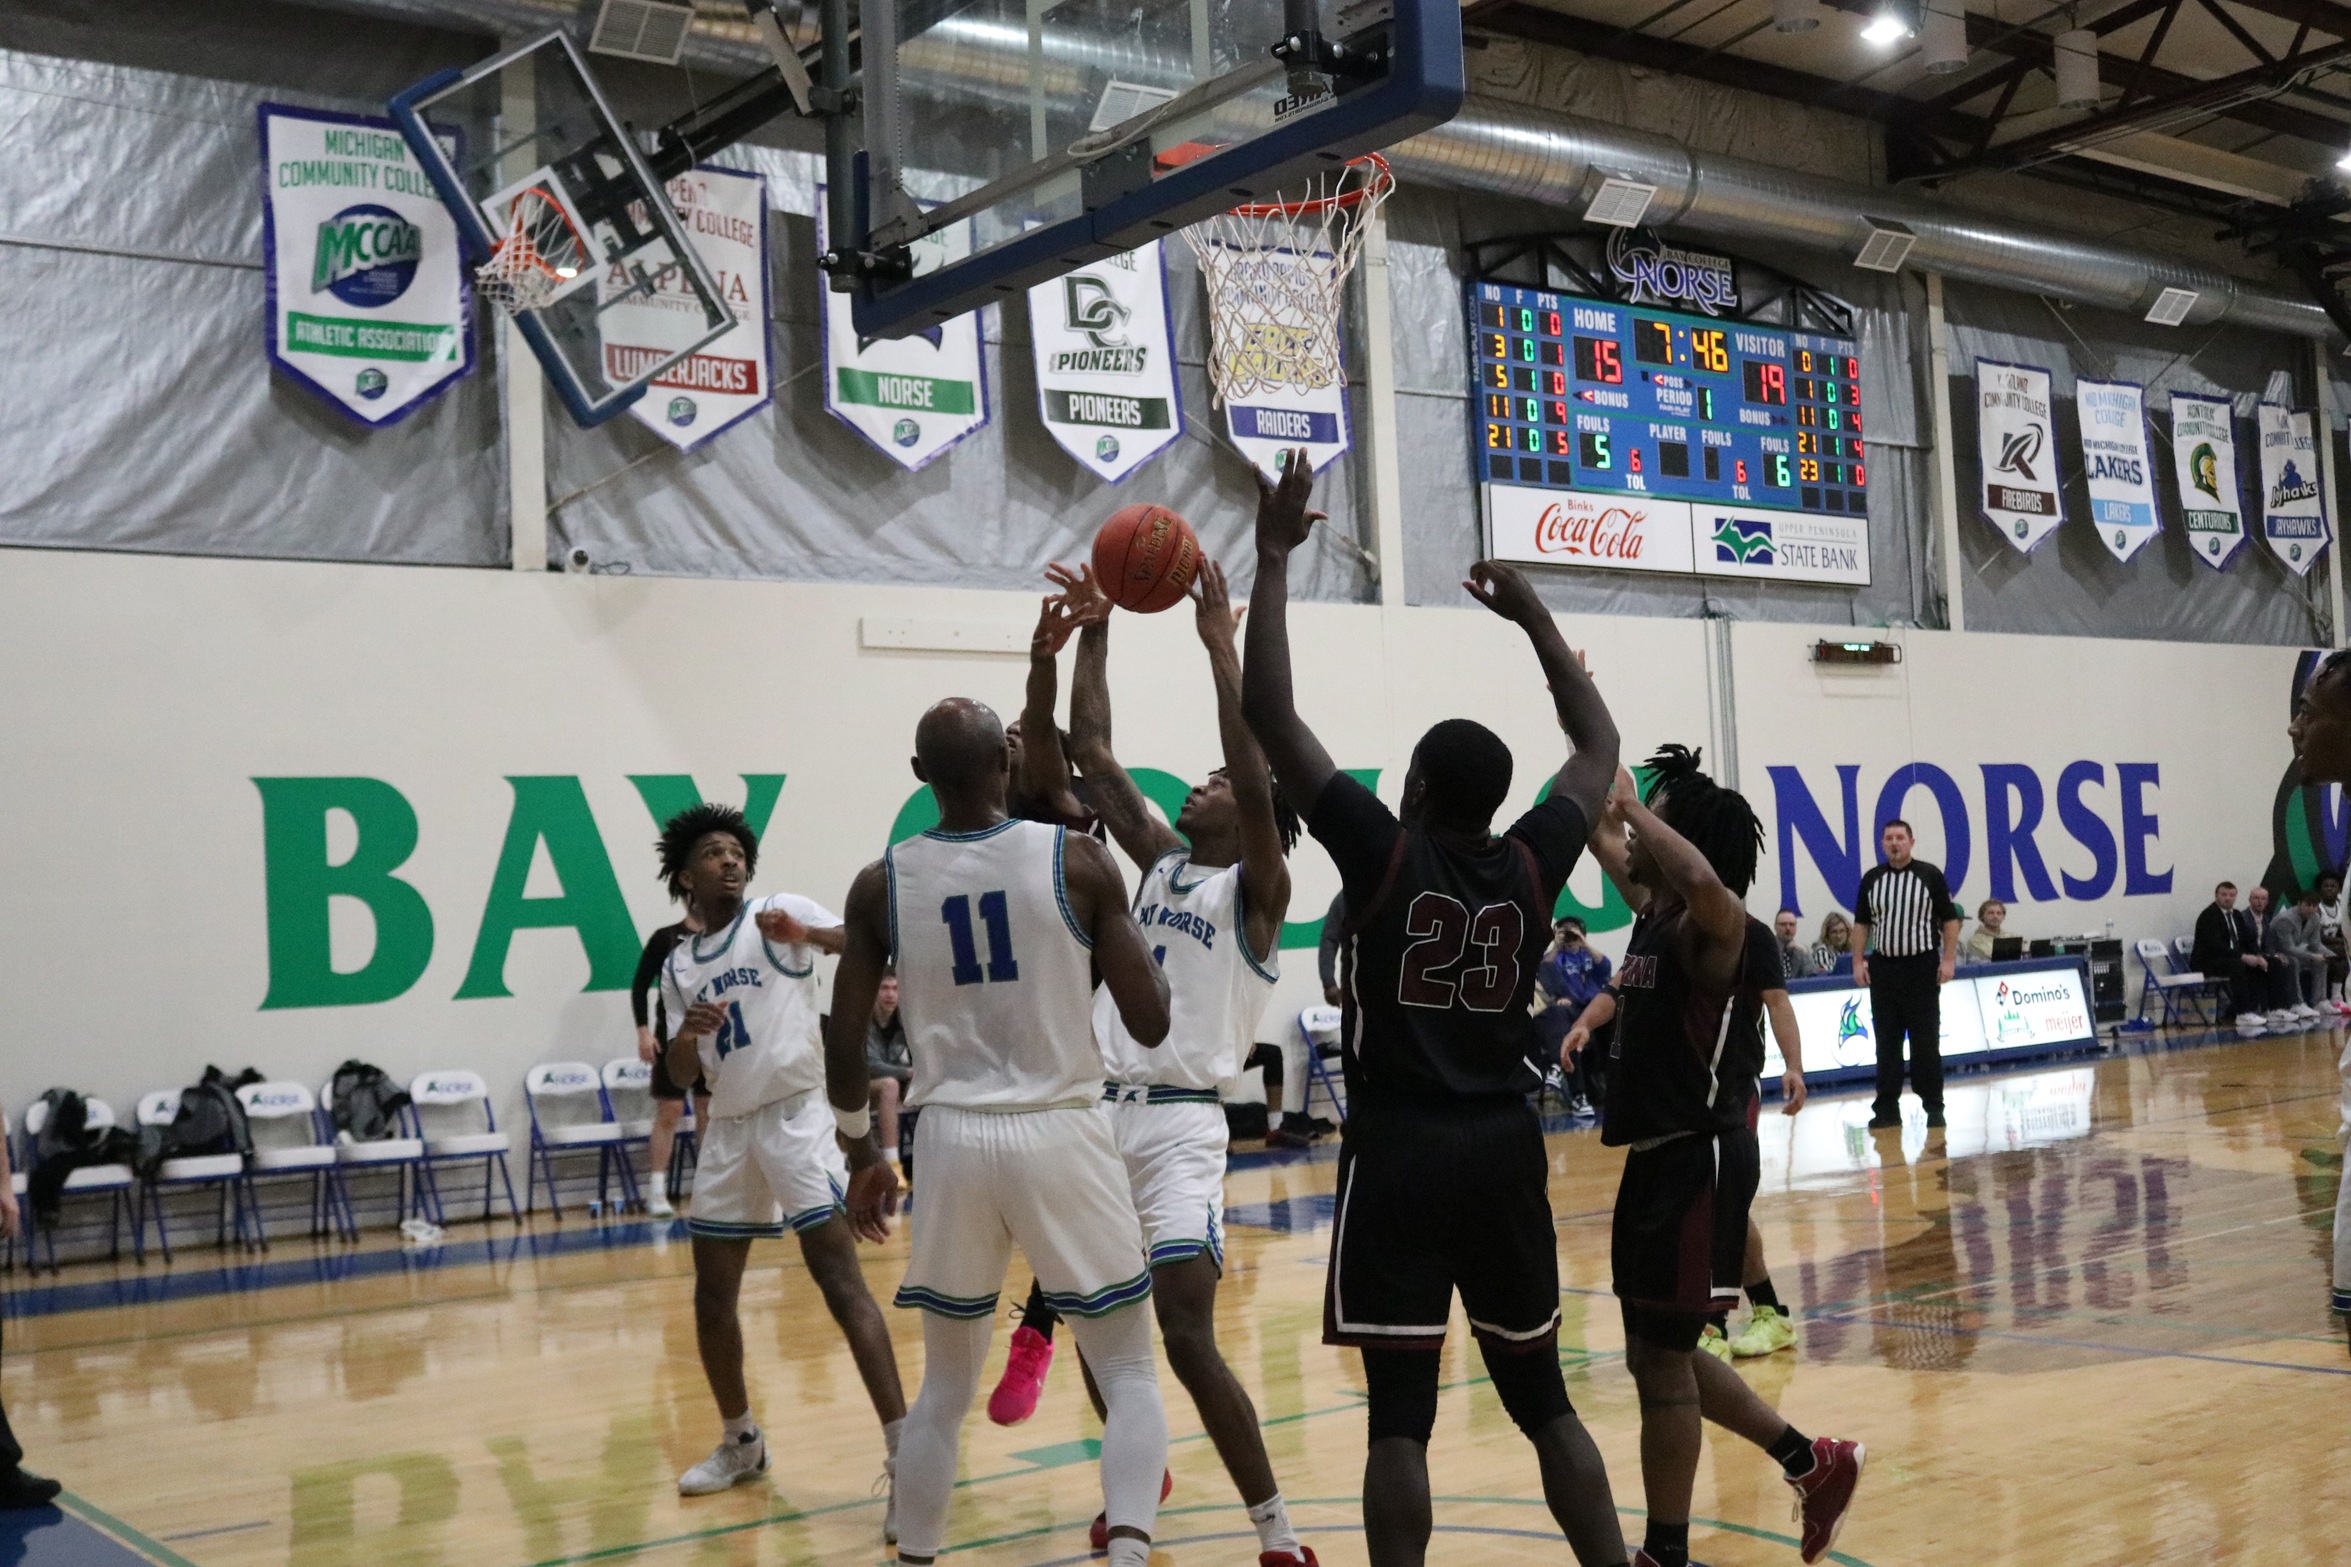 Ibrahim Diatke pulls down a rebound in the midst of several other players